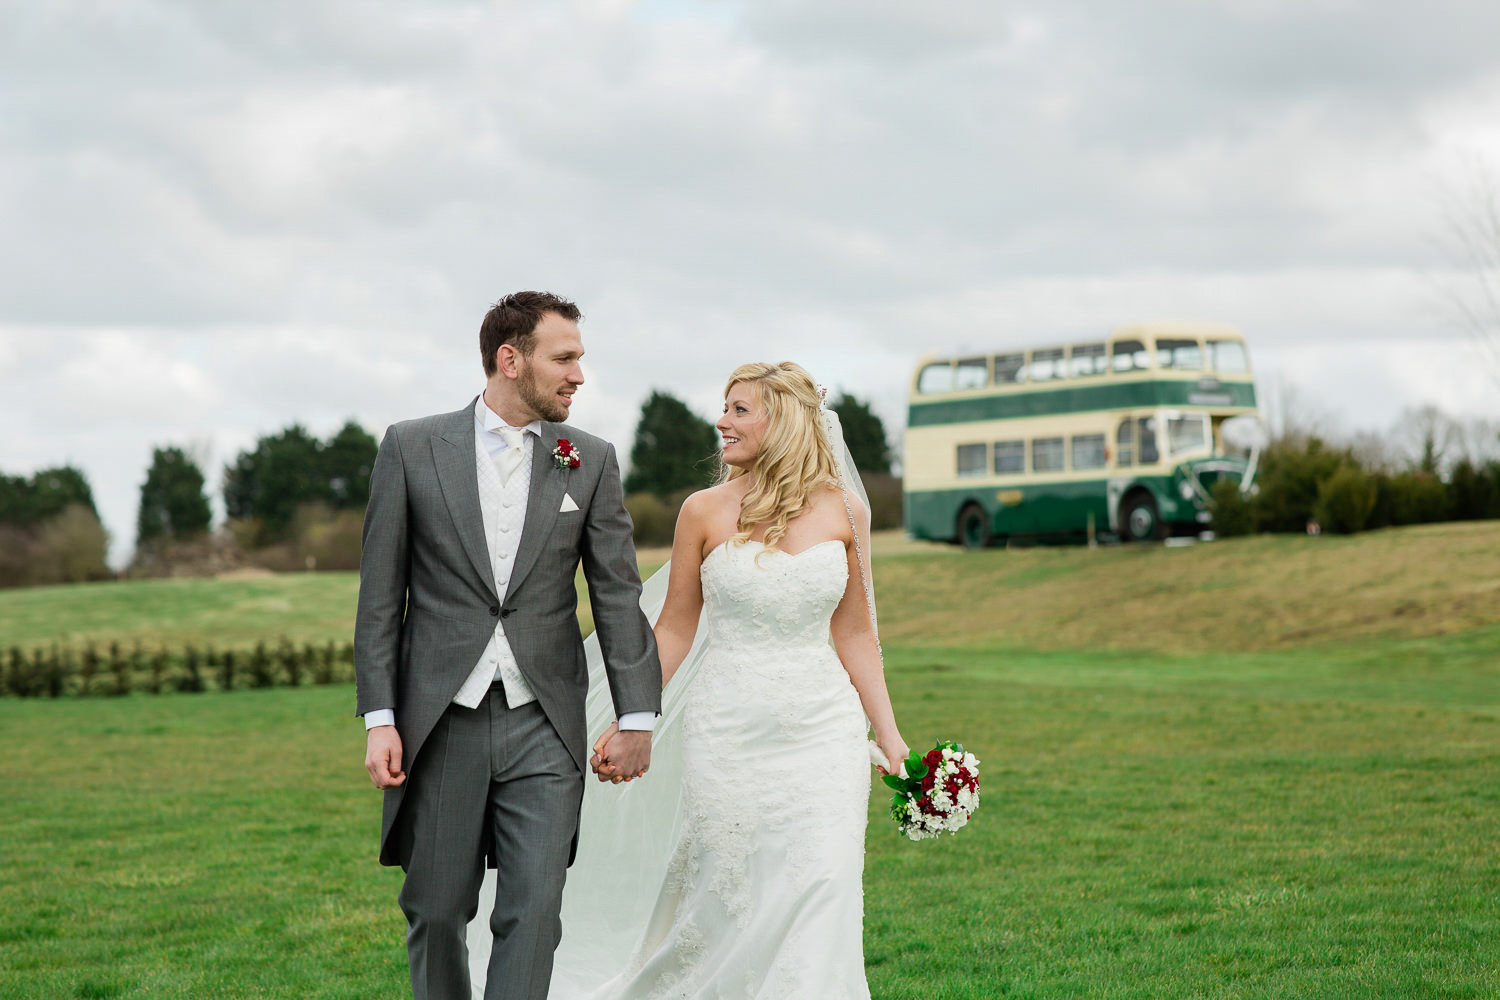 Bride and groom walking on grass with a green bus in the background